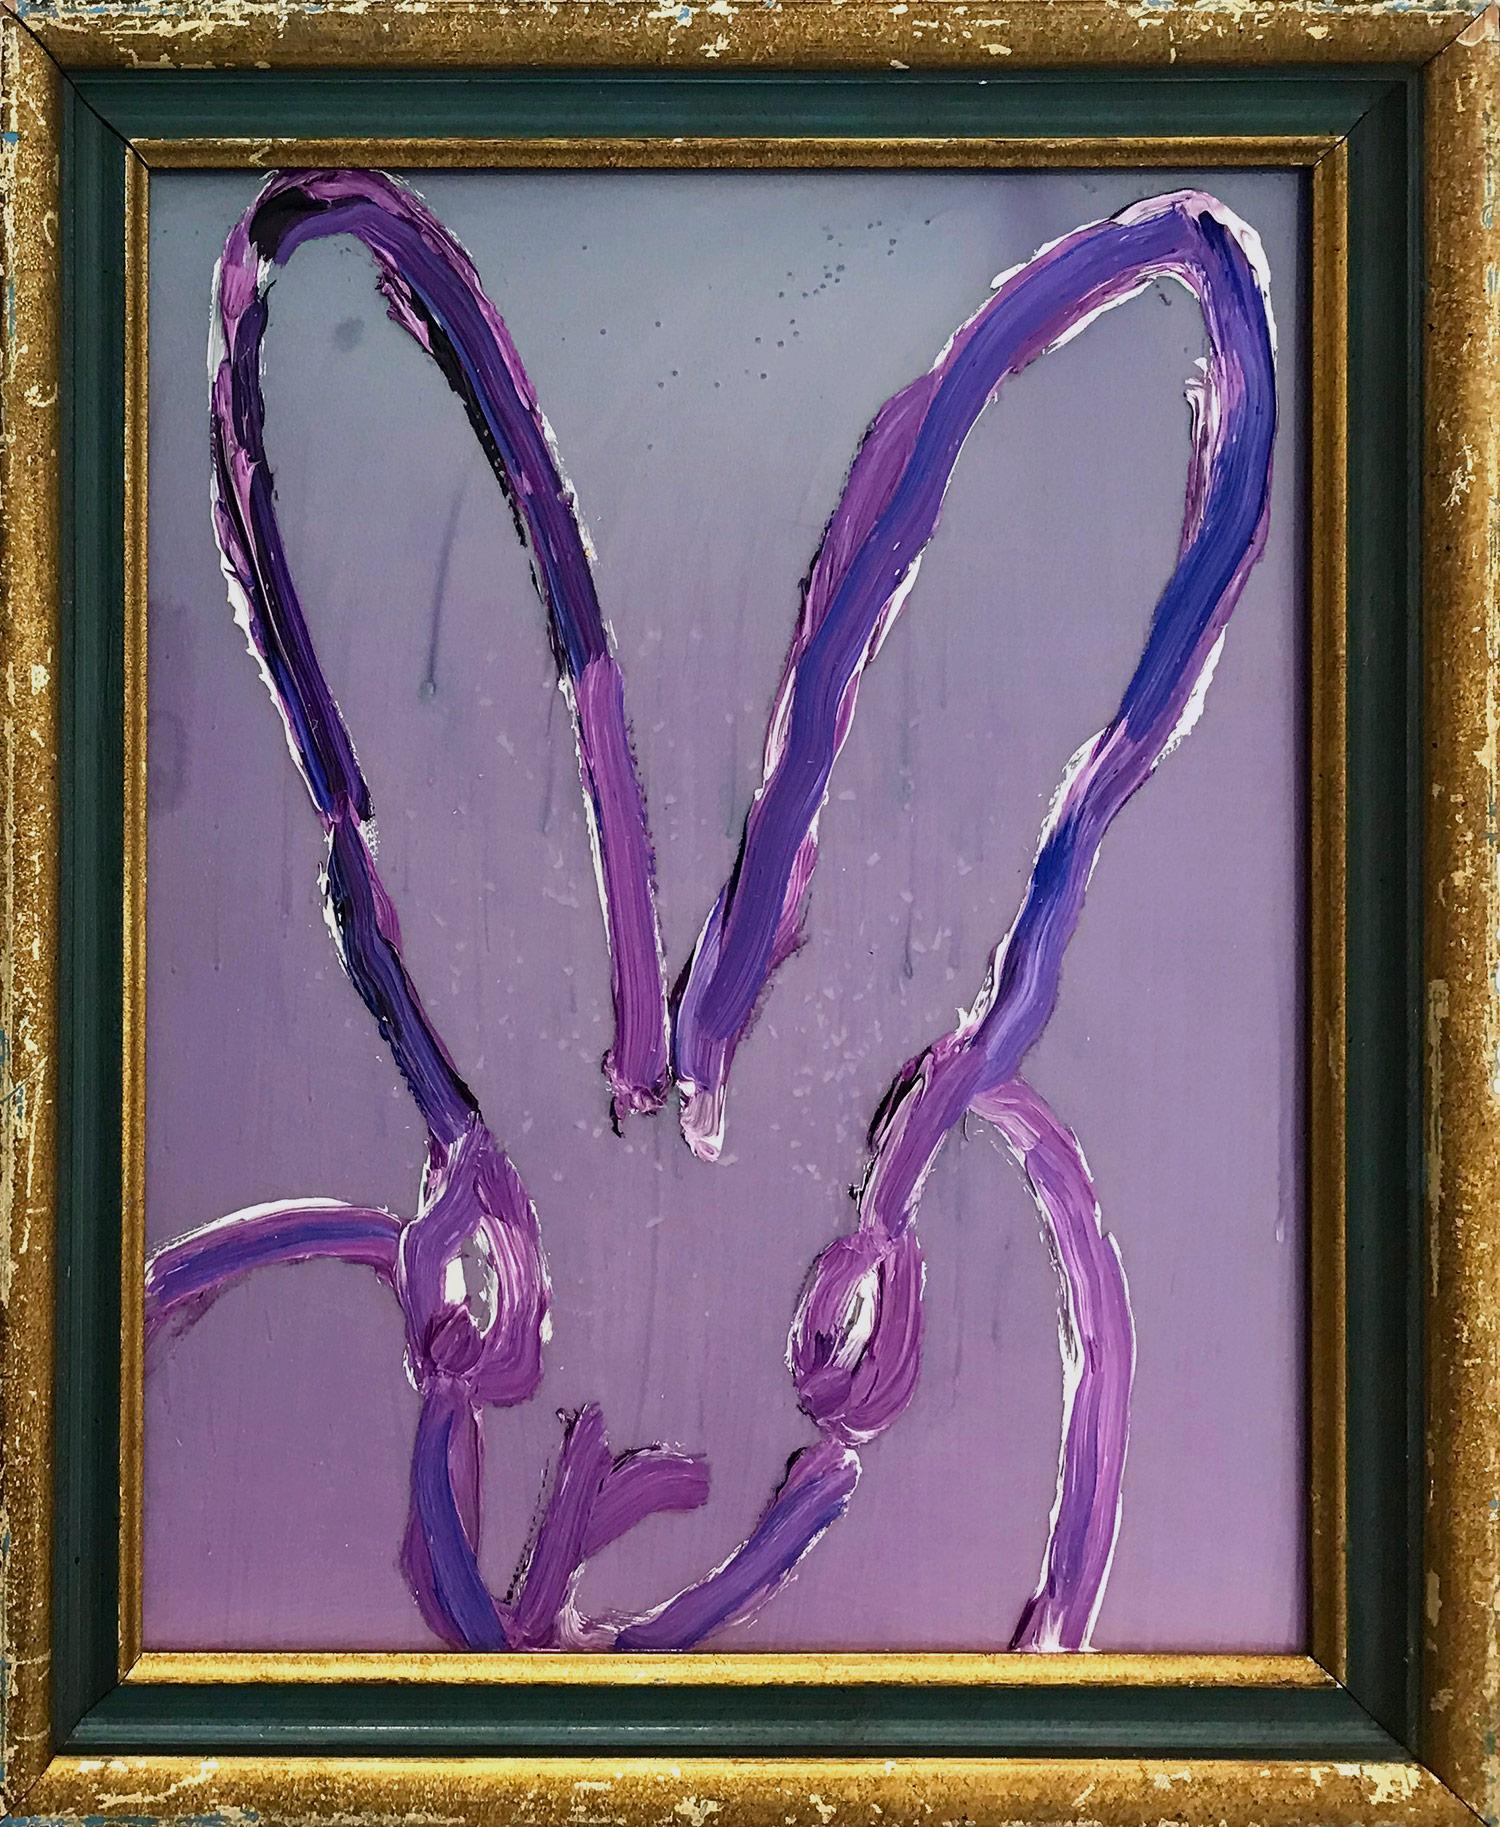 Hunt Slonem Animal Painting - "Untitled" (Pearl Purple Fantasy) Oil and Mixed Media Painting on Wood Panel